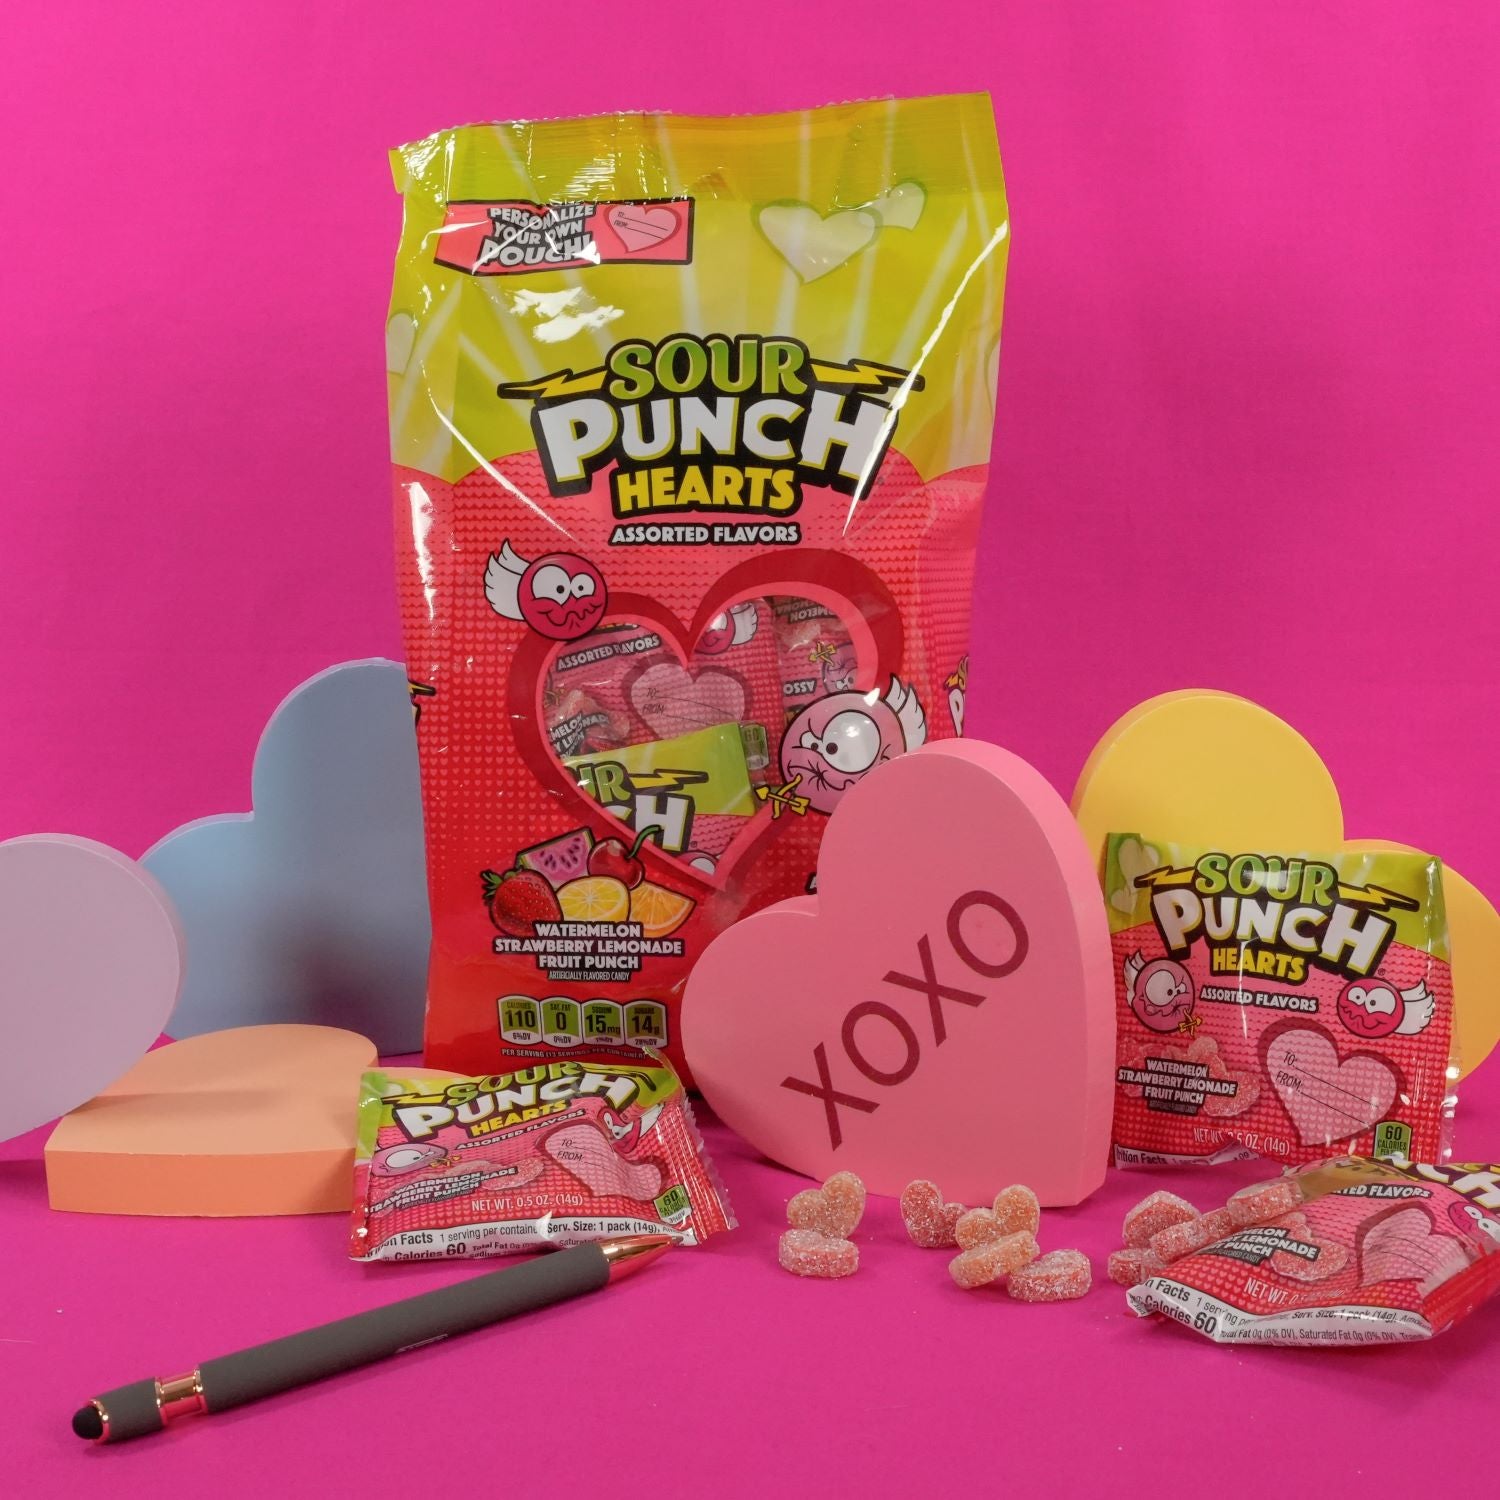 SOUR PUNCH Hearts valentine candy on hot pink background with heart props and a pen